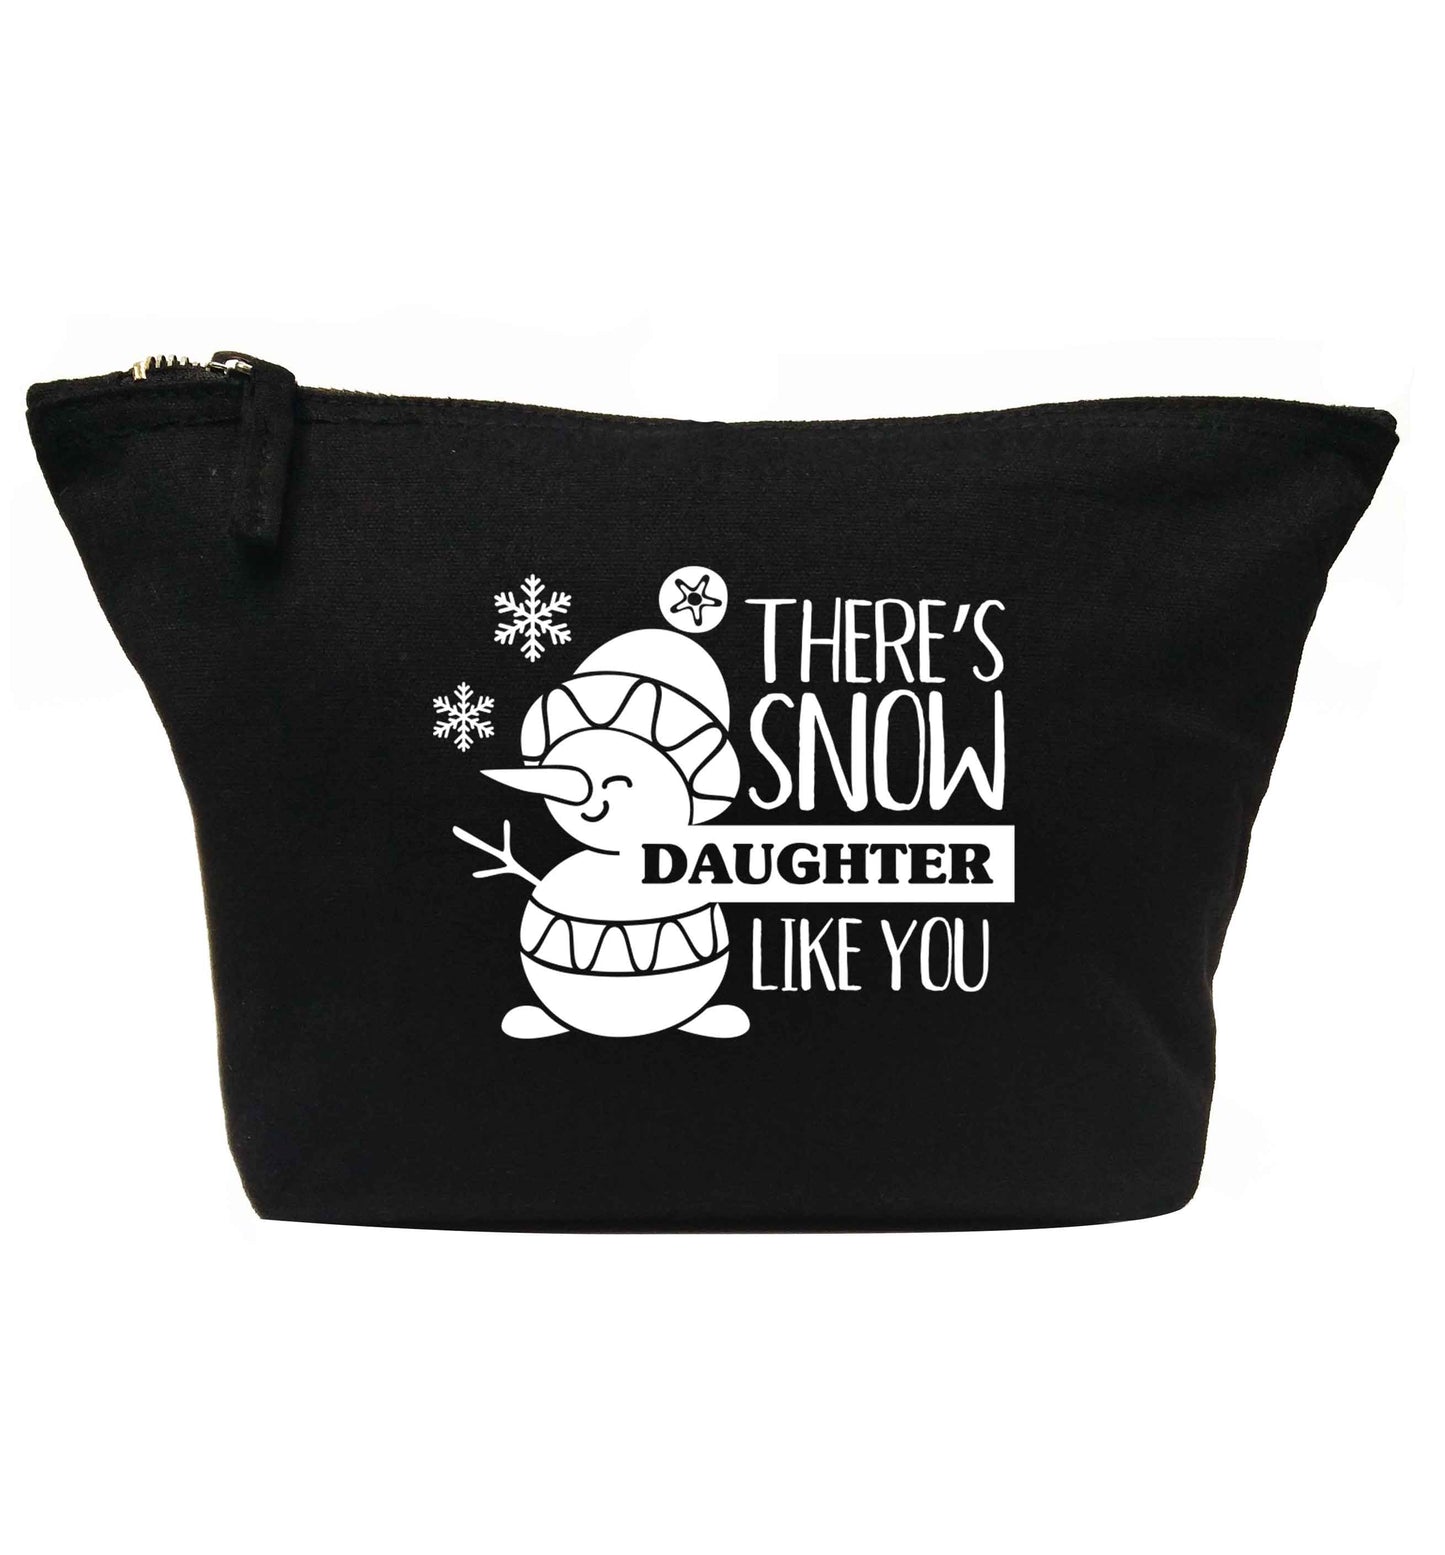 There's snow daughter like you | Makeup / wash bag